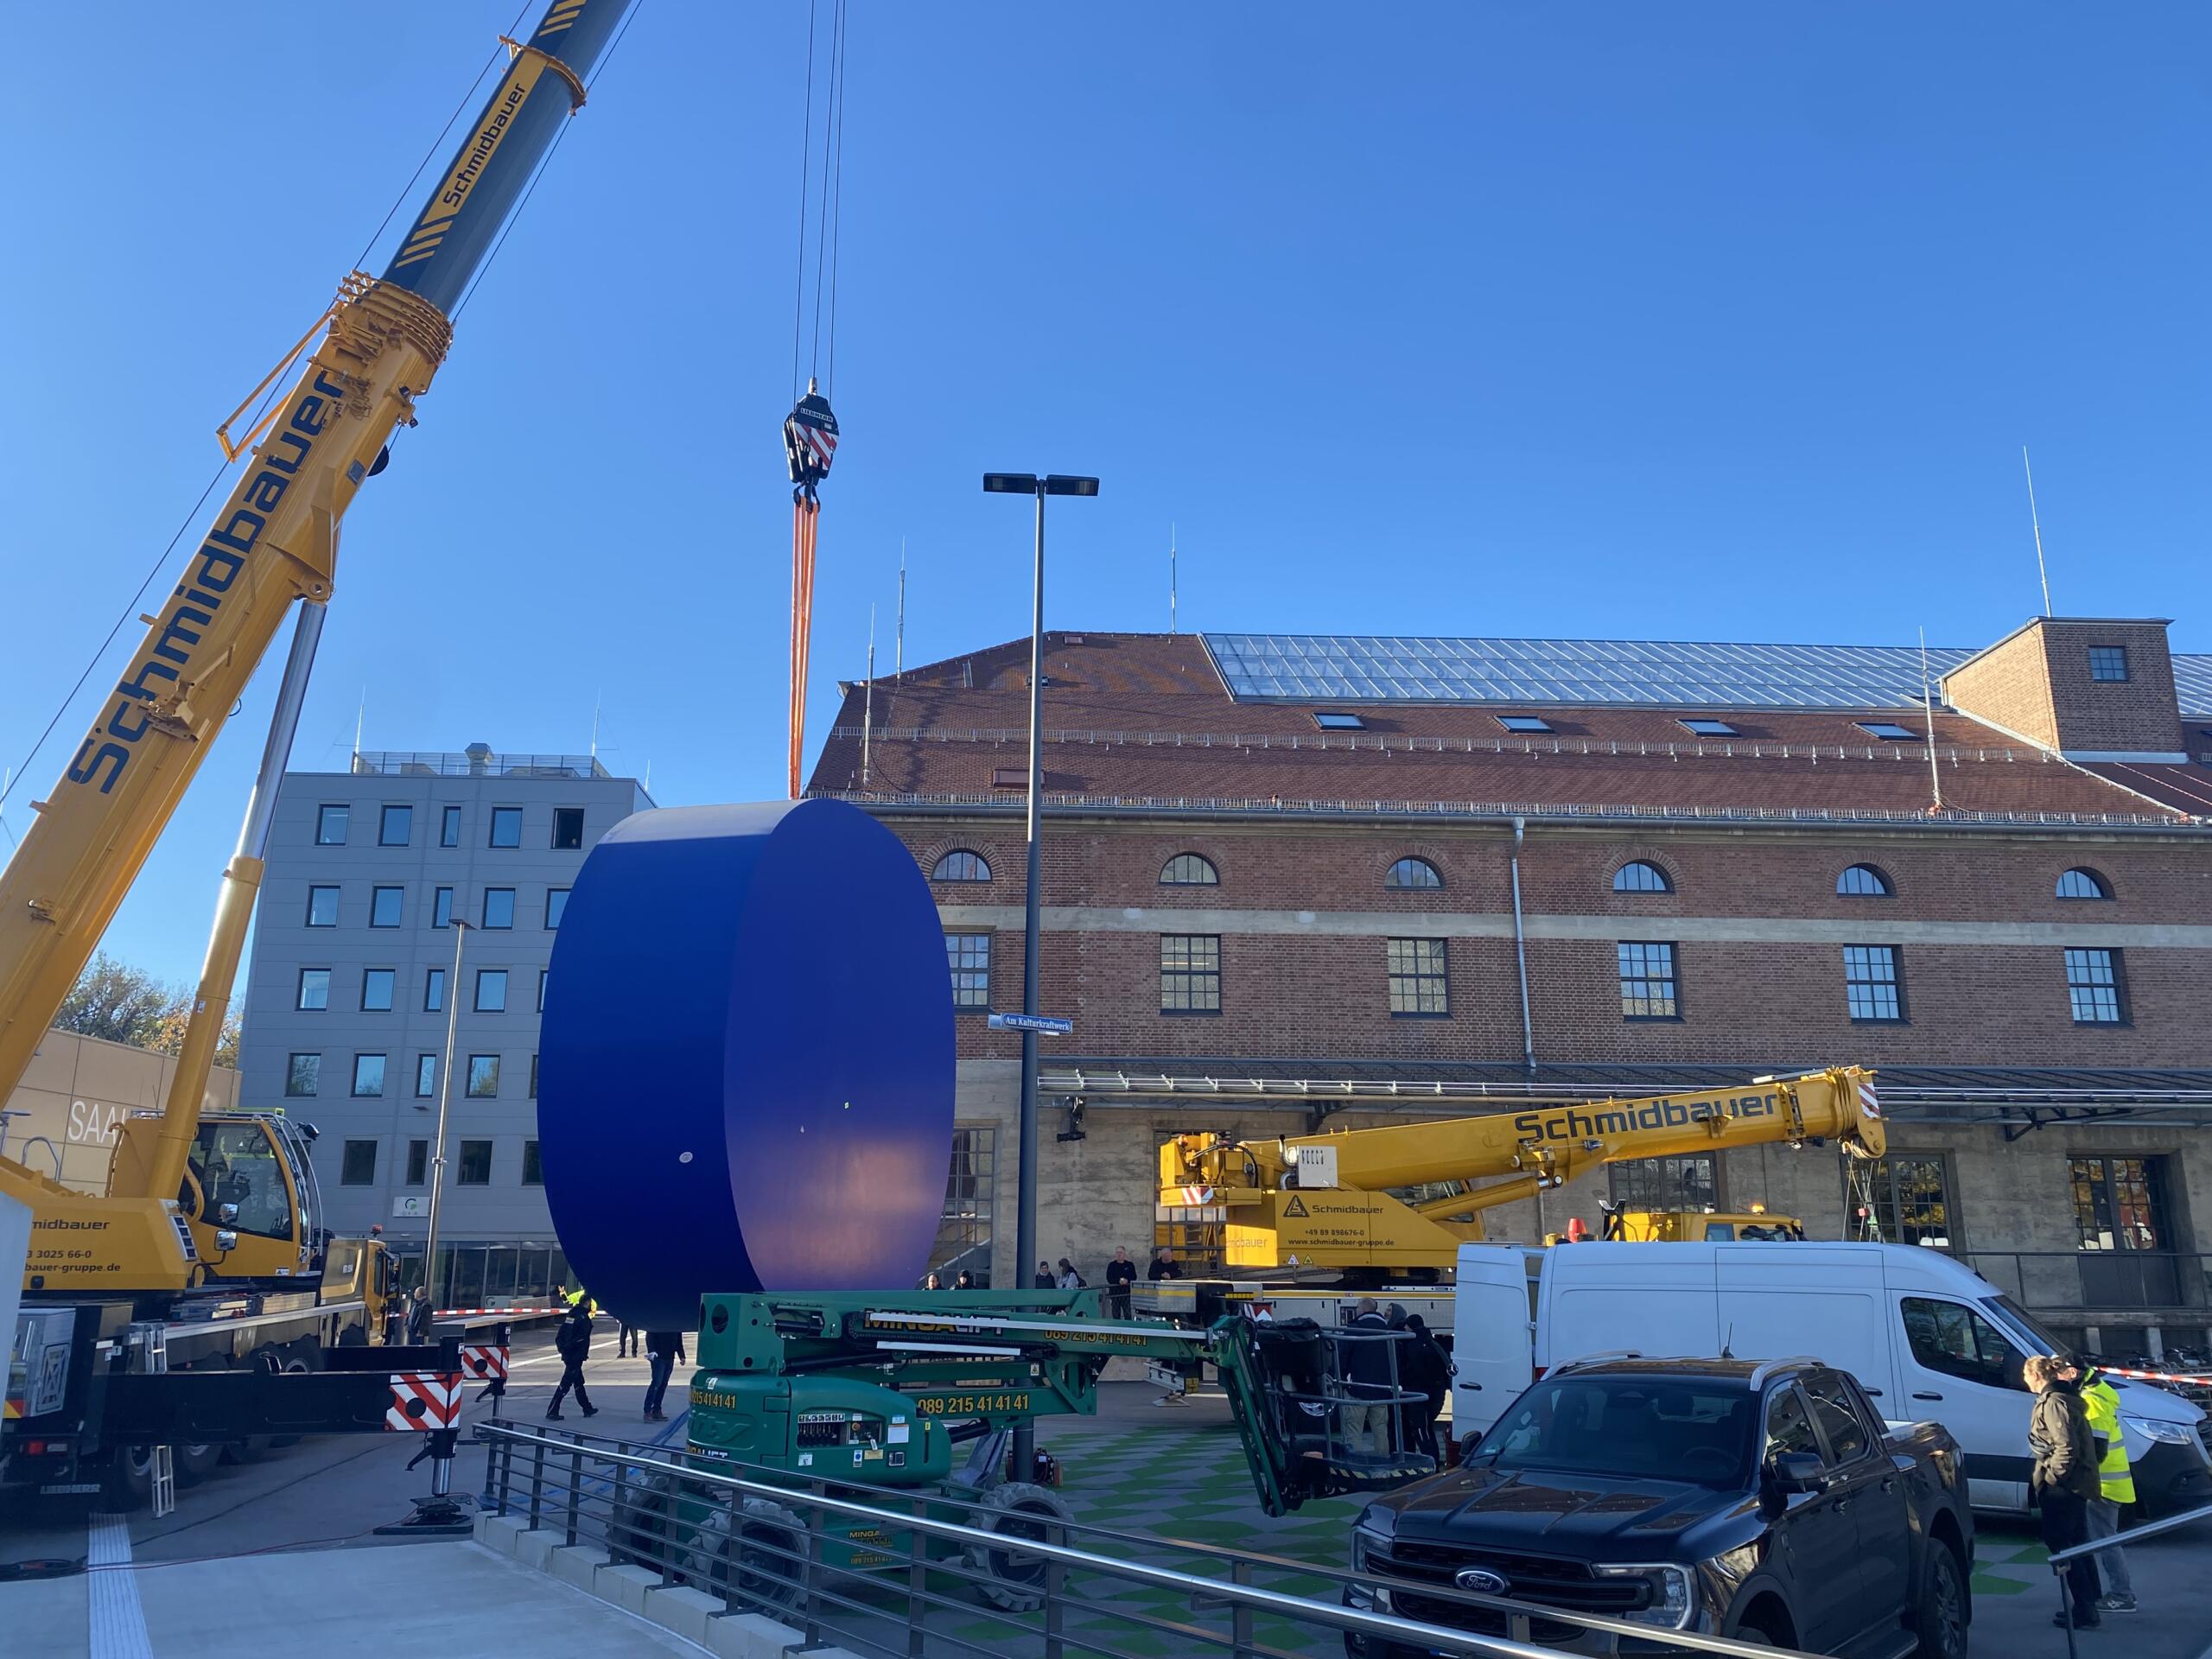 Outside, during the day, a power station in the background, a large, blue, round work of art hanging from a crane in the foreground, a brick building on the left.